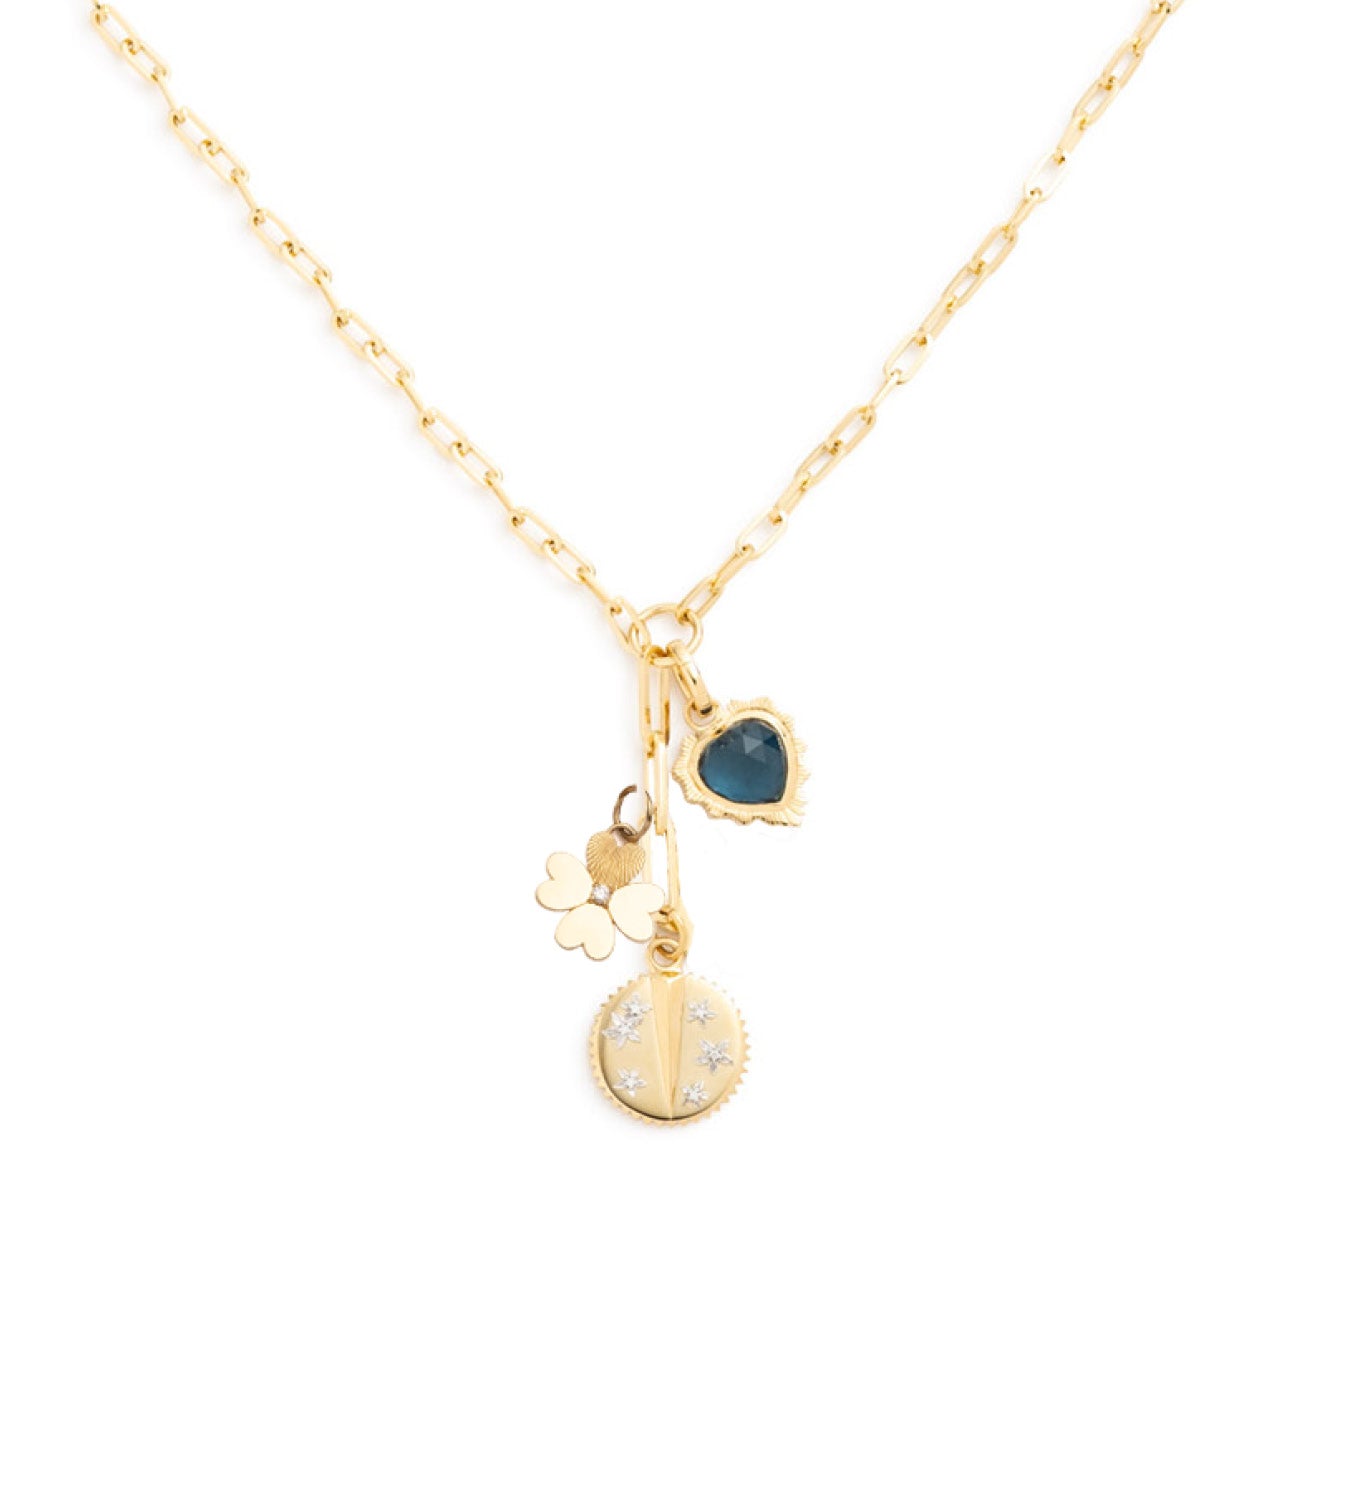 Resilience, Clover & Gemstone Heart : Refined Clip Extension Necklace